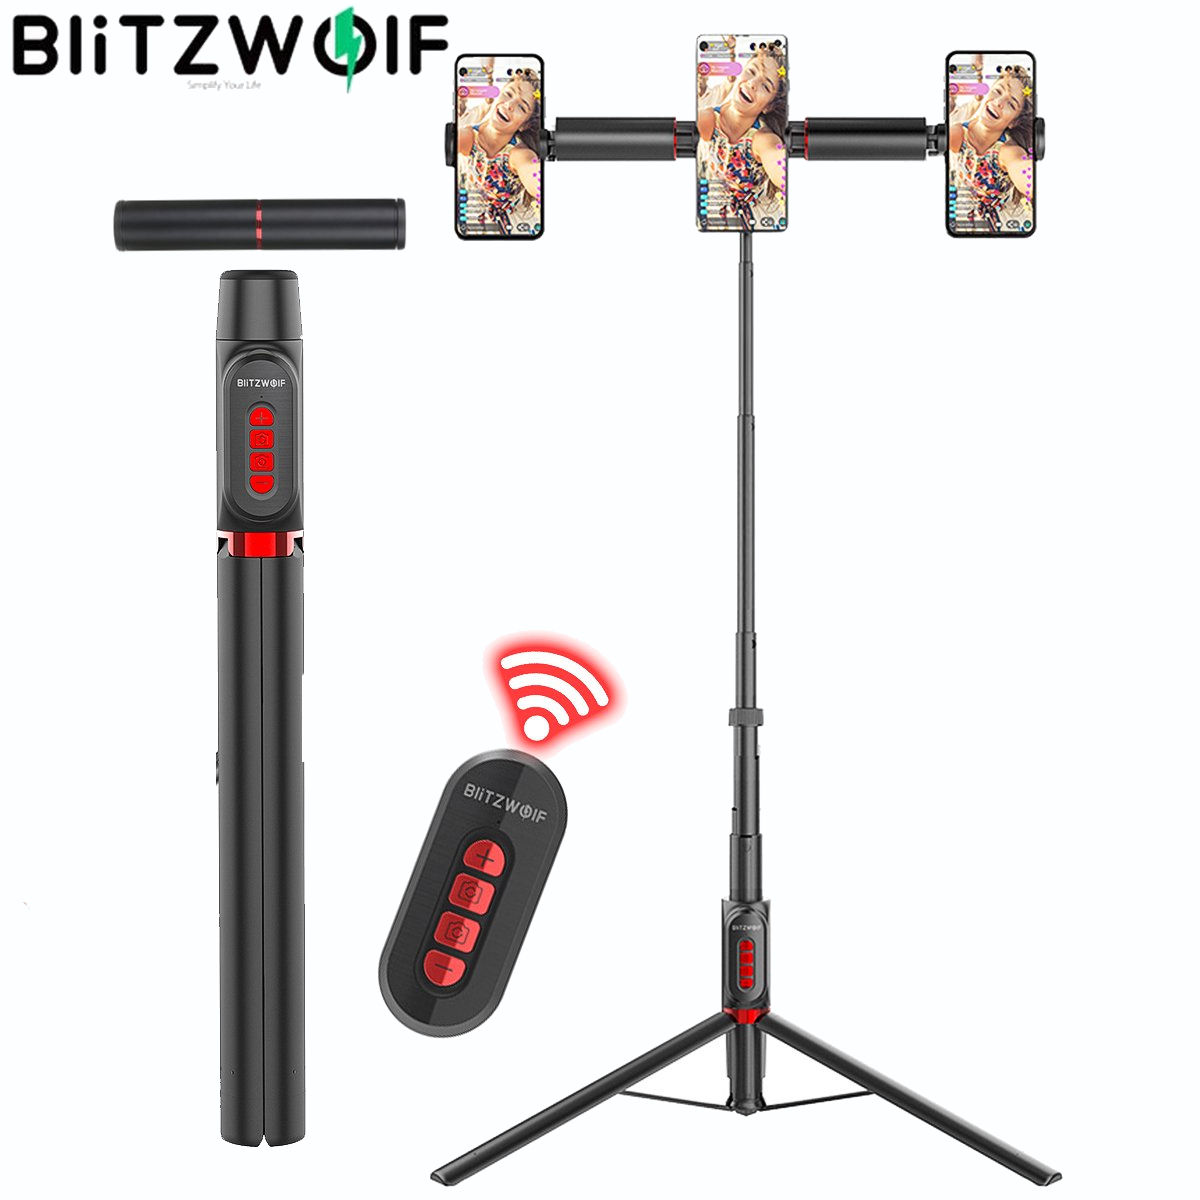 Blitzwolf Bluetooth 5.0 Selfie Stick, Multi-Device Tripod in One, Wireless Remote Control with Horizontal Rotation Adjustment, Phone Ring Light, Adjustable Length, Suitable for DSLR YouTube Tiktok Mak - image 1 of 11